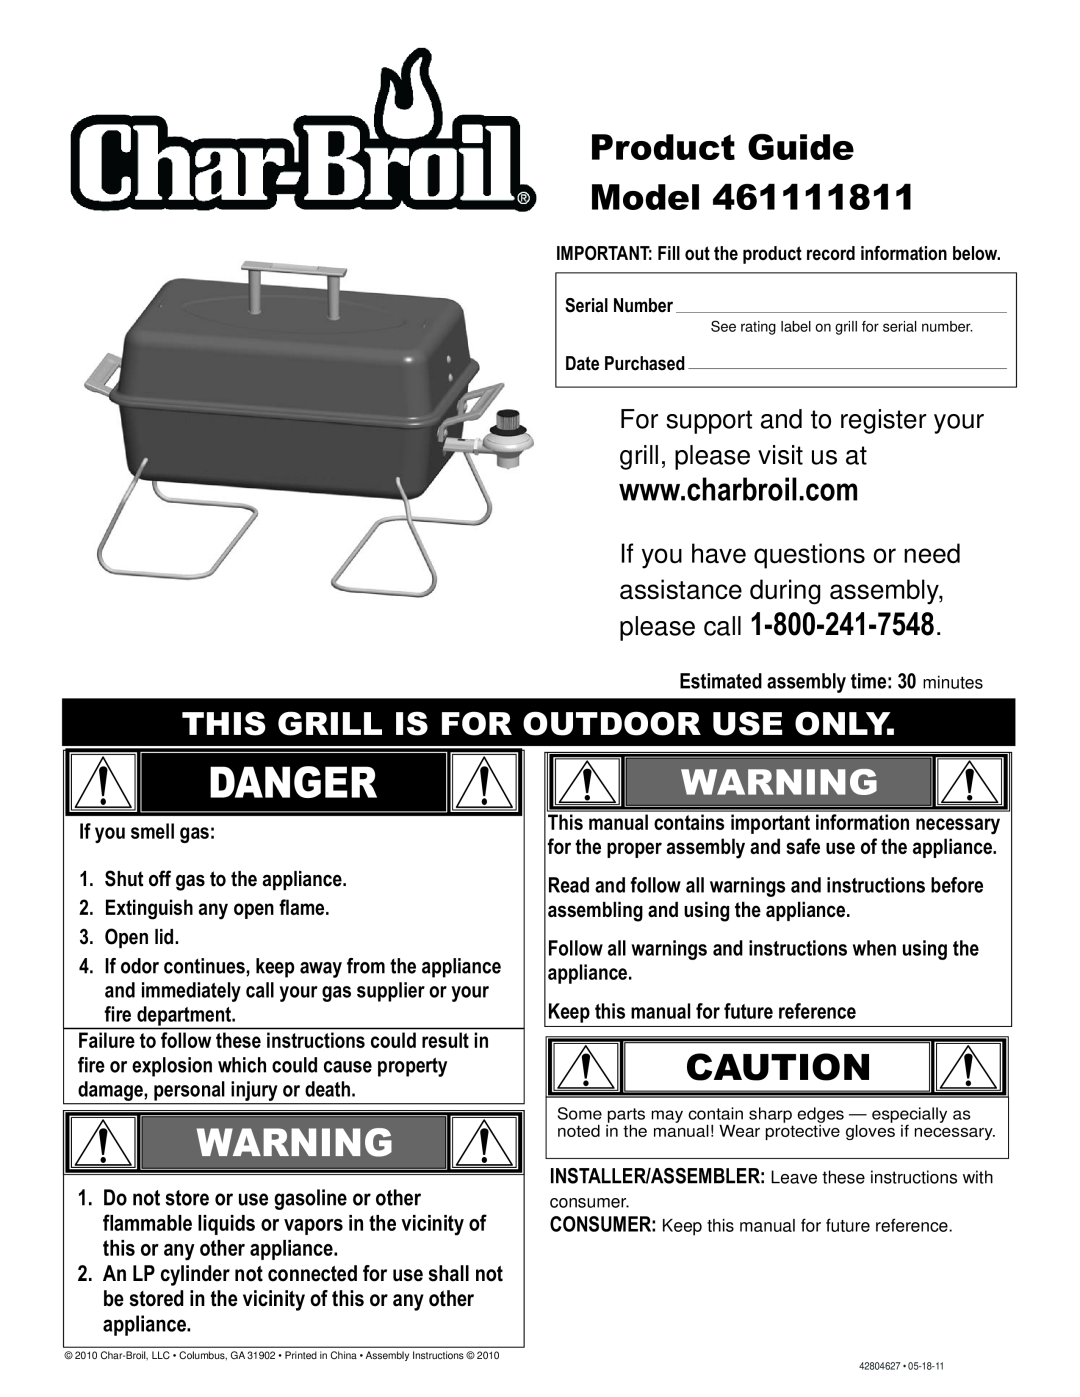 Char-Broil 461111811 manual Danger, This Grill Is For Outdoor Use Only, Estimated assembly time 30 minutes, please call 